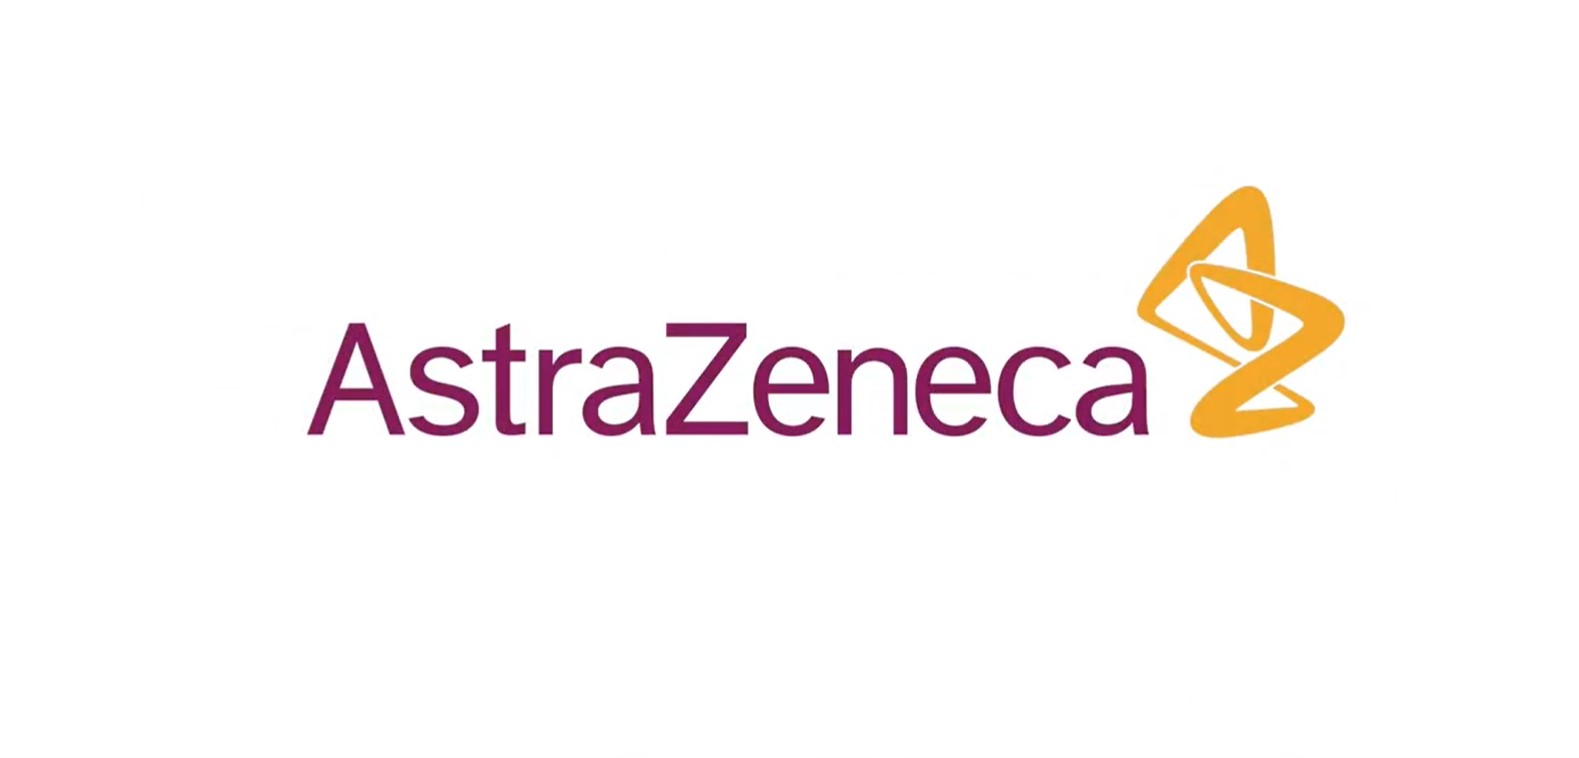 Health News Roundup: AstraZeneca resumes UK trials of COVID-19 vaccine halted by patient illness; Mainland China reports 10 new COVID-19 cases and more